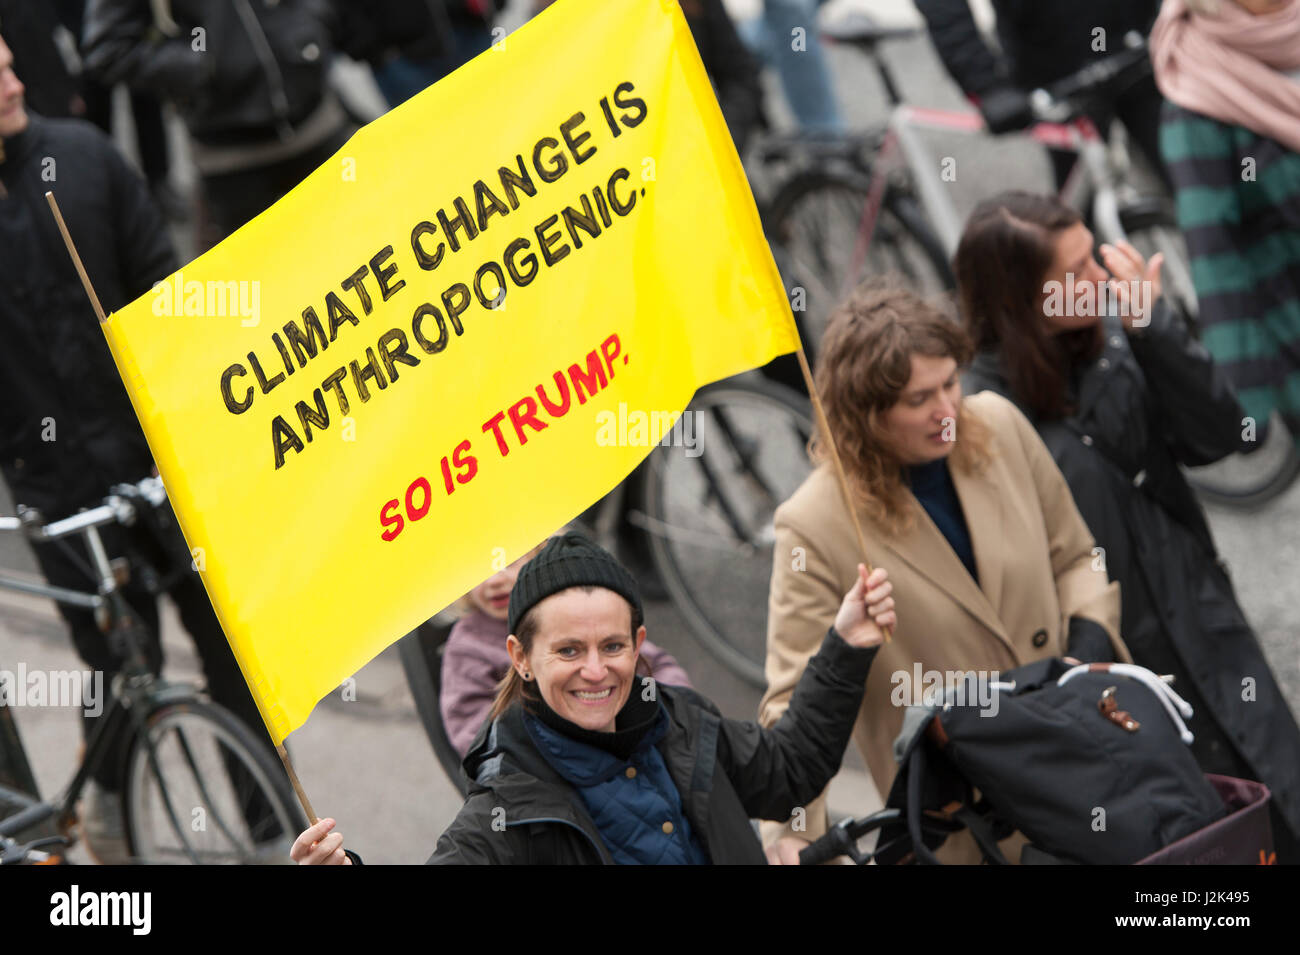 Copenhagen, Denmark, Saturday 29th April, 2017 More than 1700 people join a climate change march in the Danish city of Copenhagen on Saturday. The march coincides with US President Donald Trump's first 100 days in office, and is part of a larger initiative happening in the United States under the title Climate March. The event in Denmark has been organised by a group calling themselves Folkets Klimamarch København (English: The People's Climate March Copenhagen) Credit: Matthew James Harrison/Alamy Live News Stock Photo